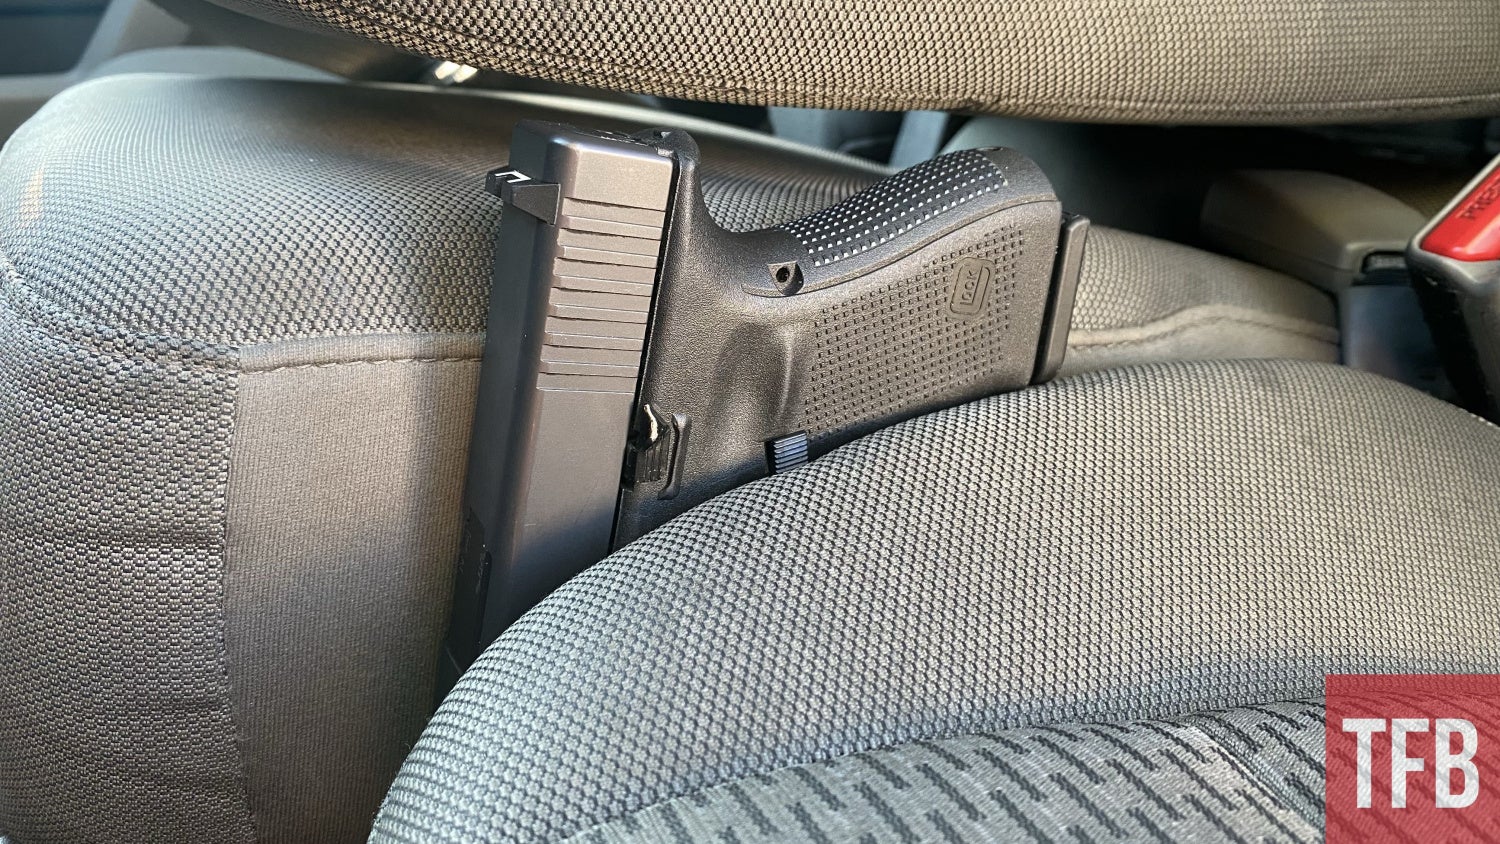 Concealed Carry Corner: Vehicle Carry Mistakes To Avoid